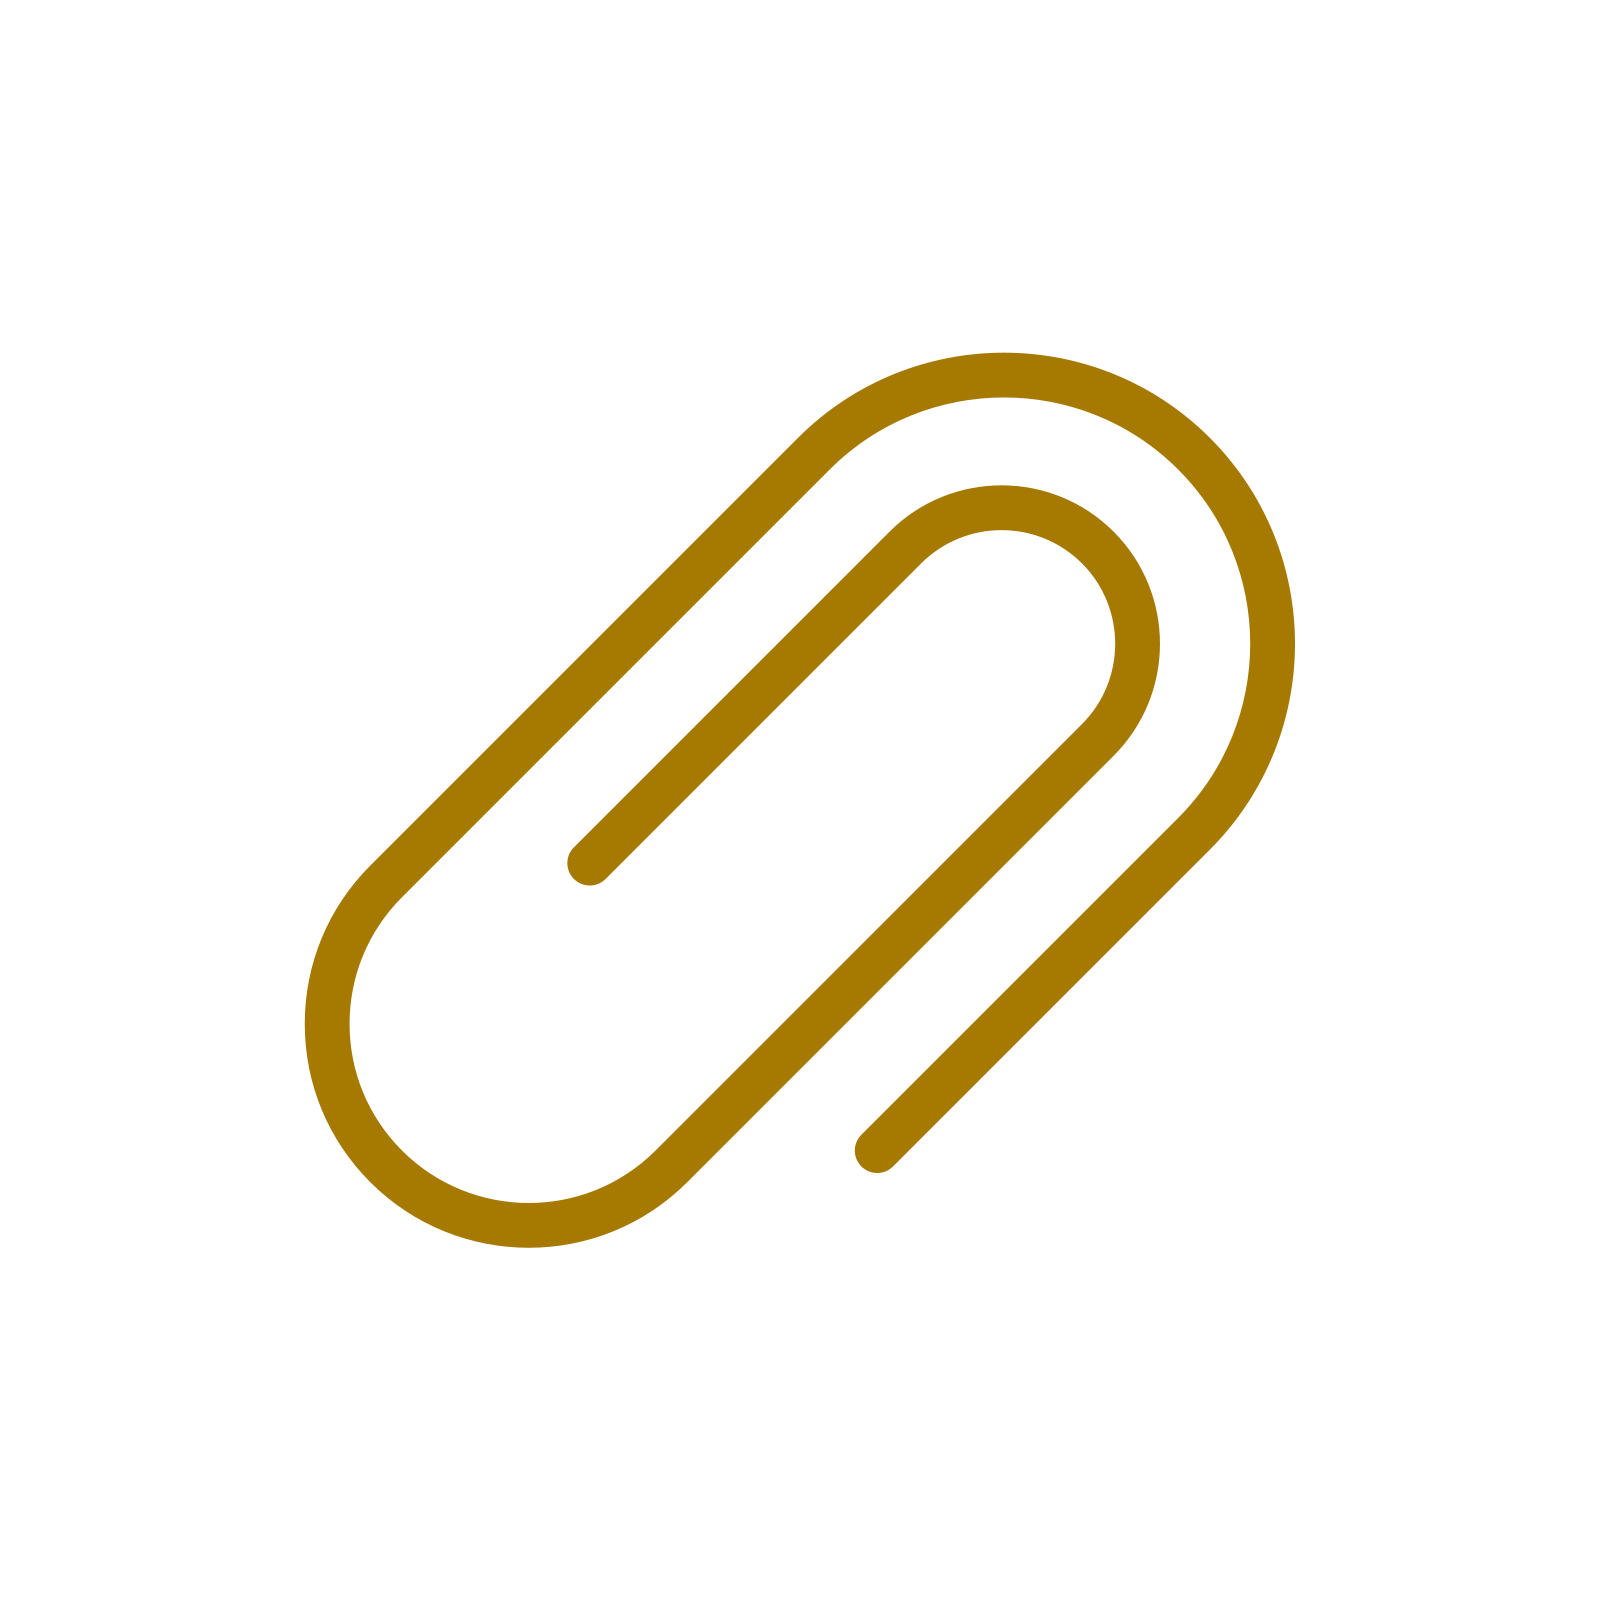 Paperclip icon